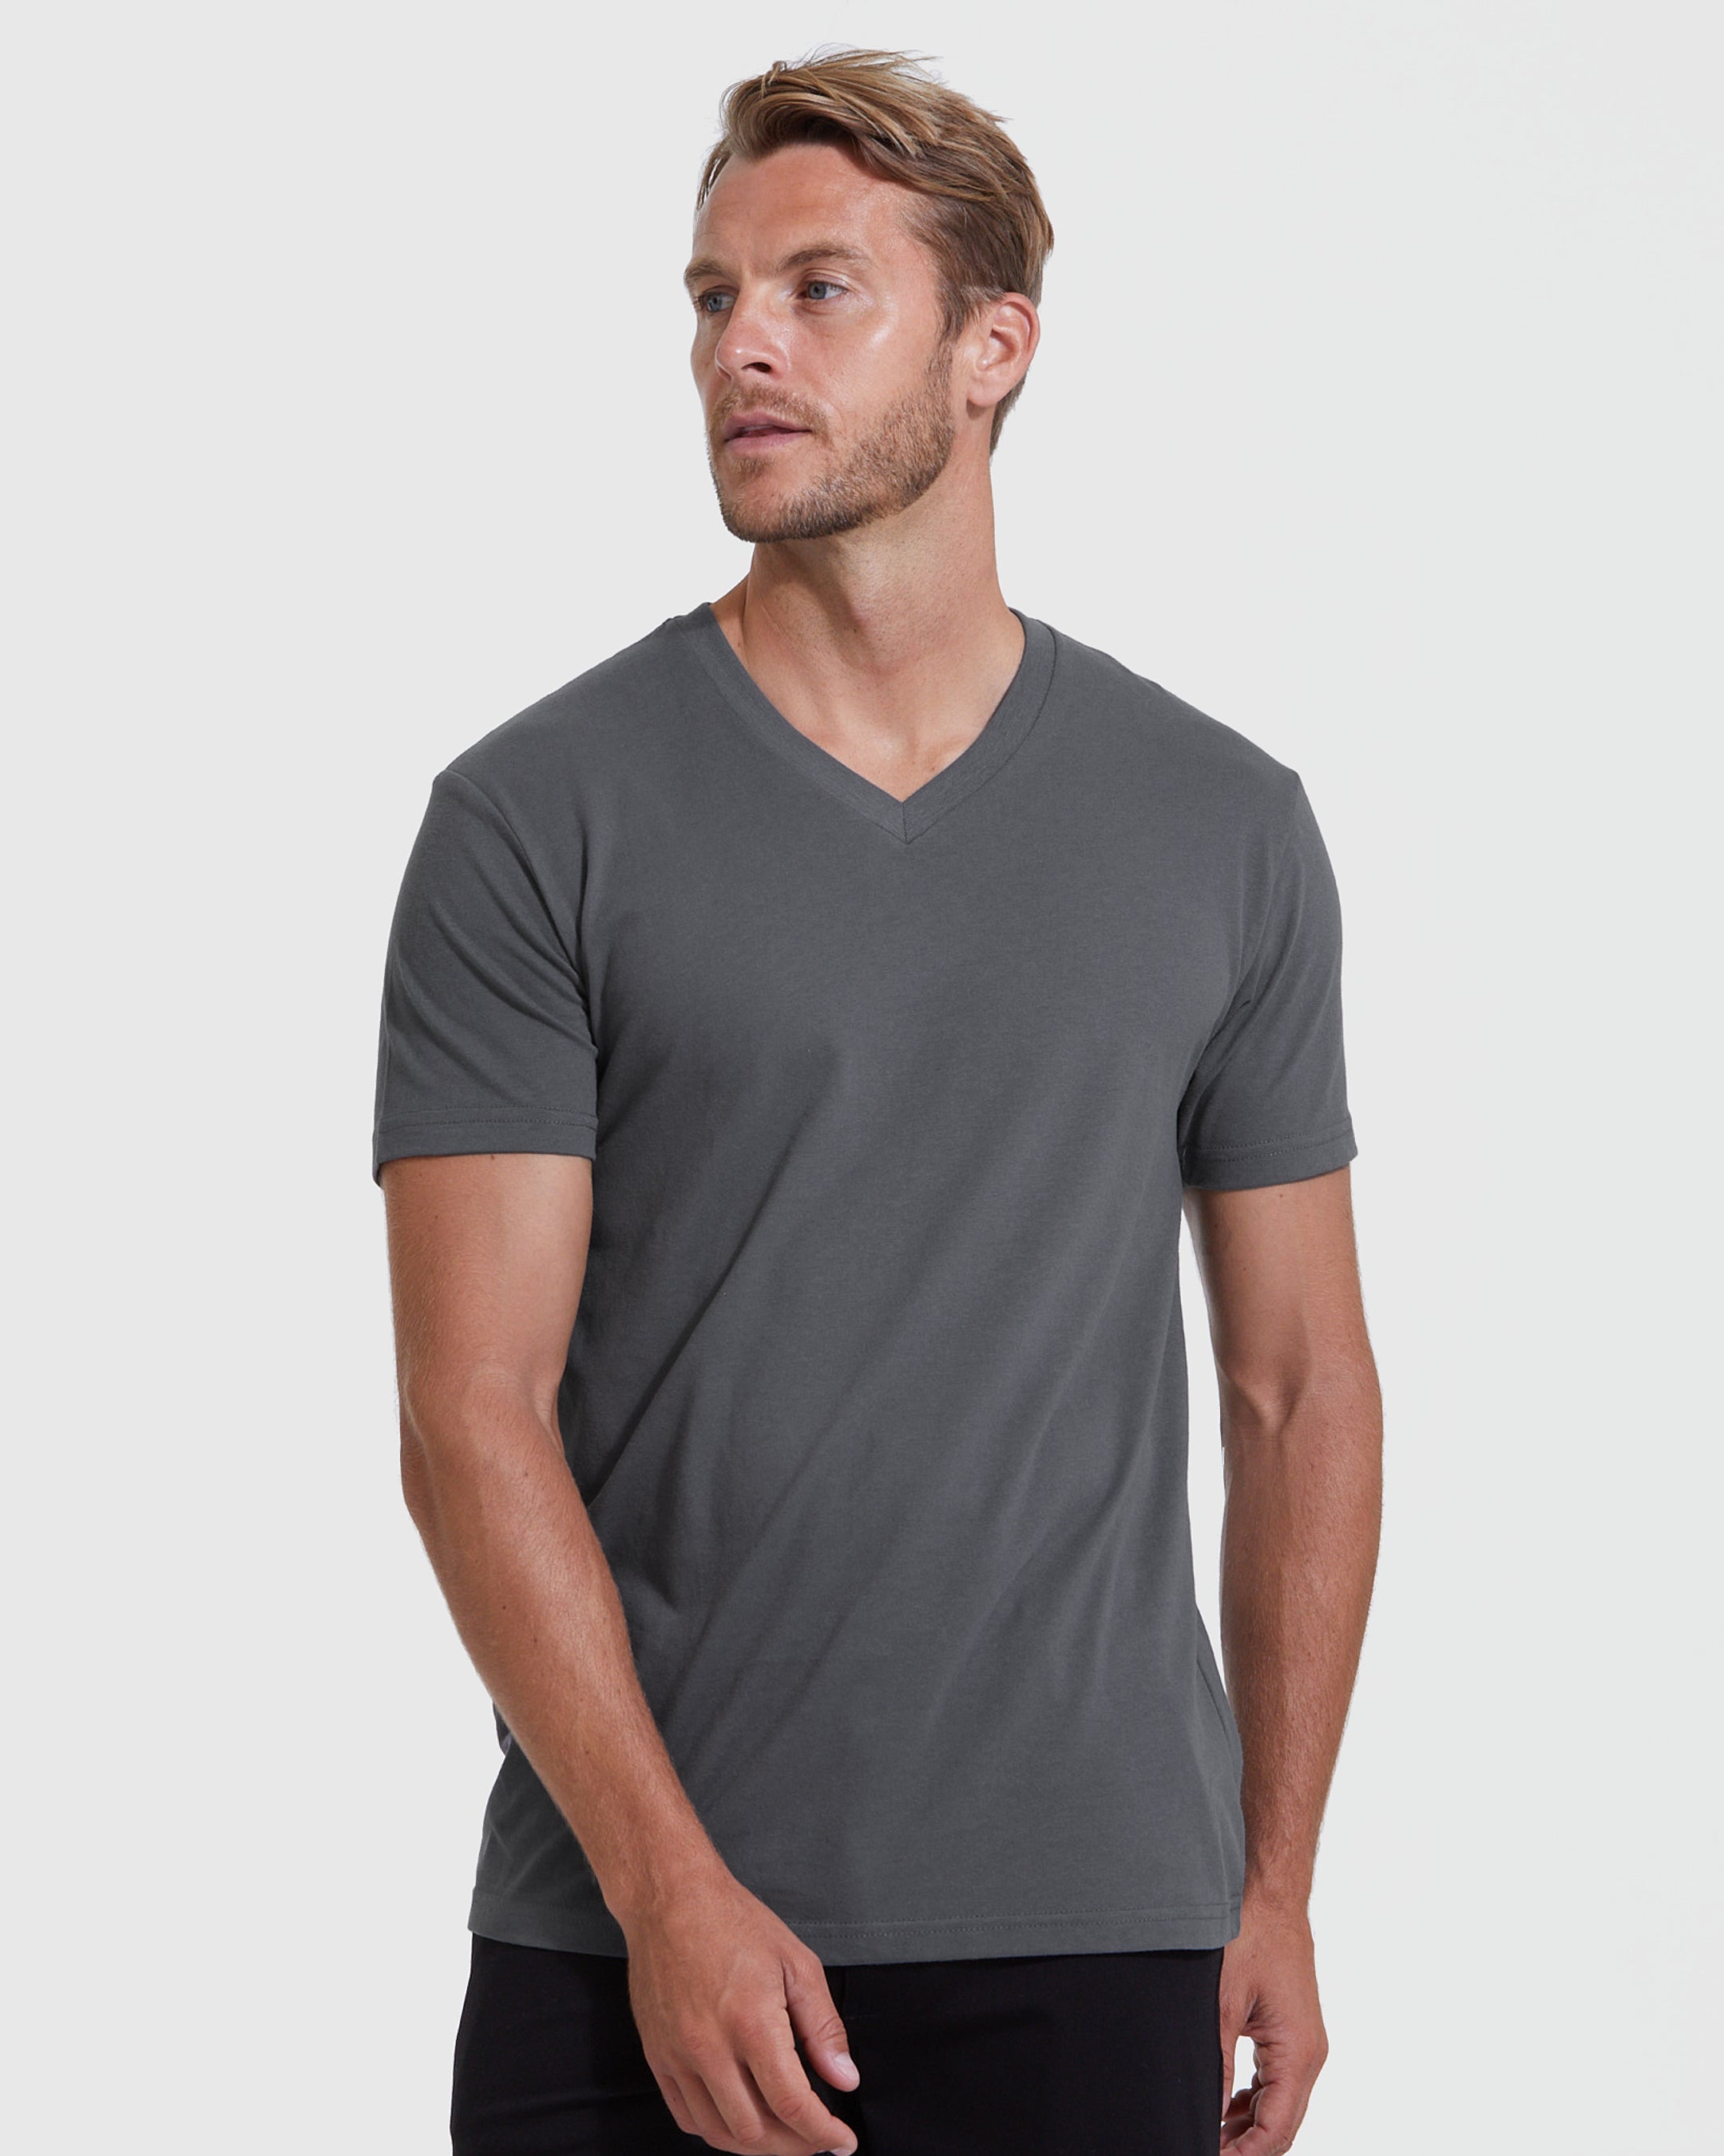 The Color V-Neck 3-Pack – True Classic